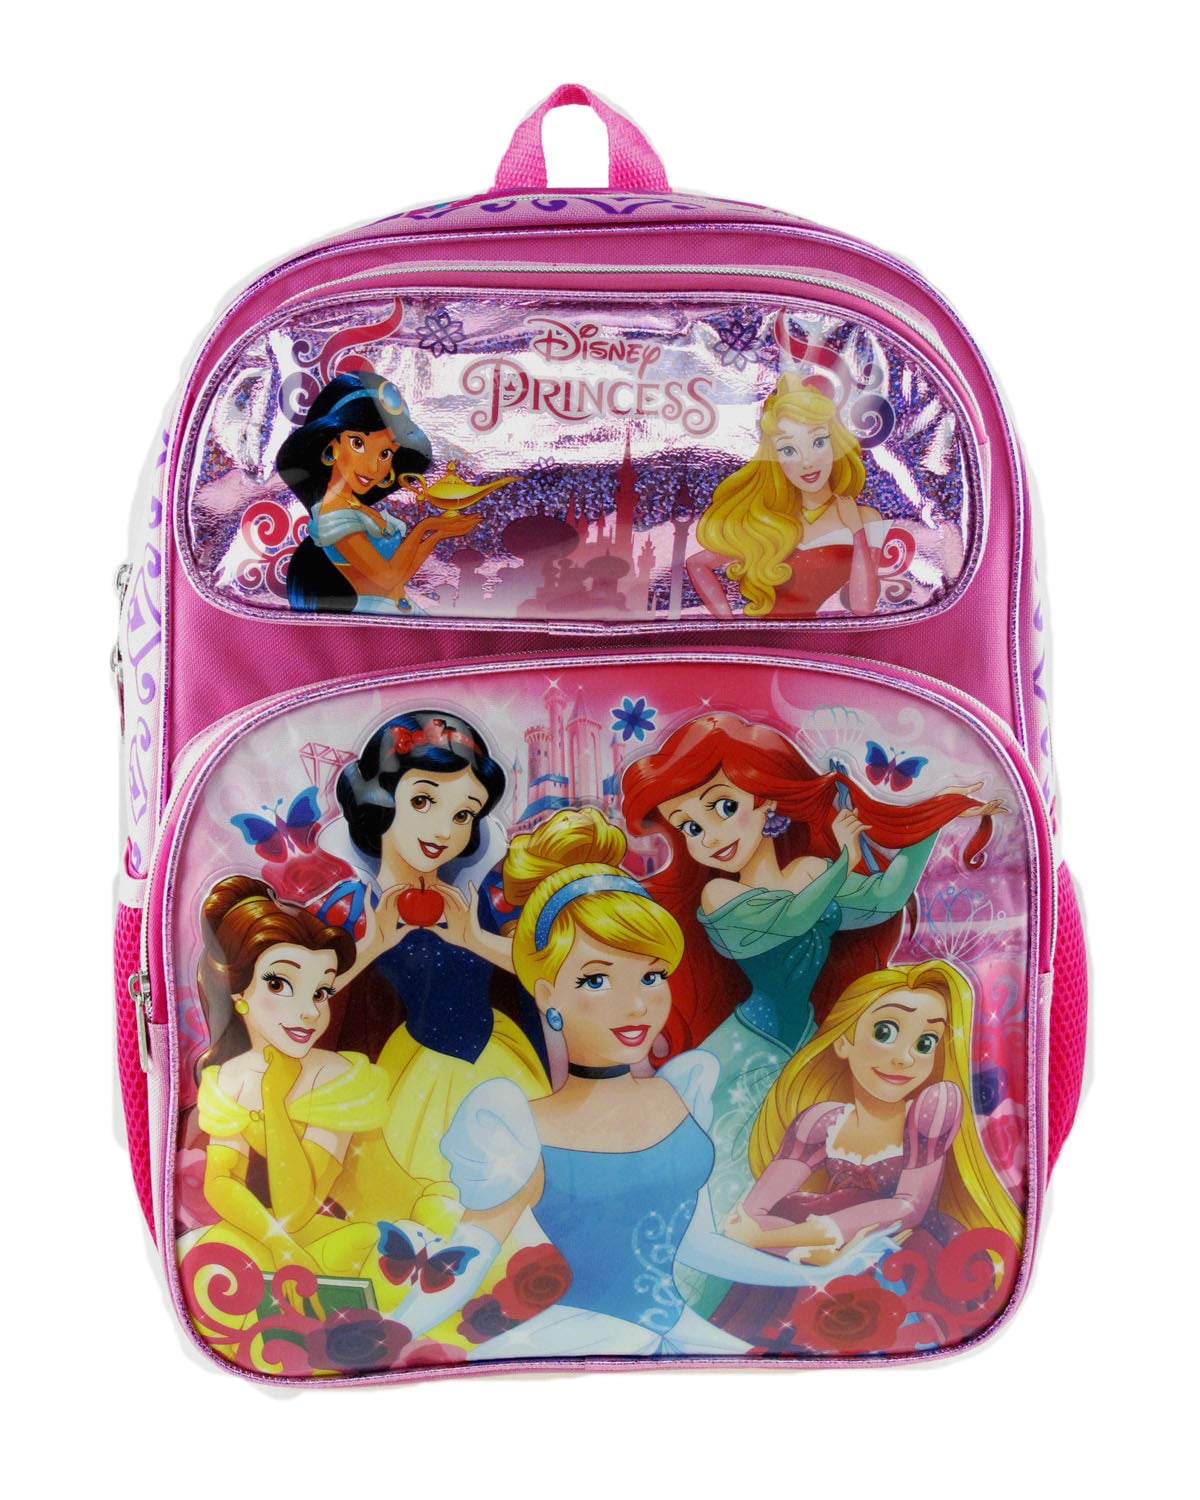 Disney Princess Story All Characters Backpack Girls School Book Bag Gift Toy Kid 